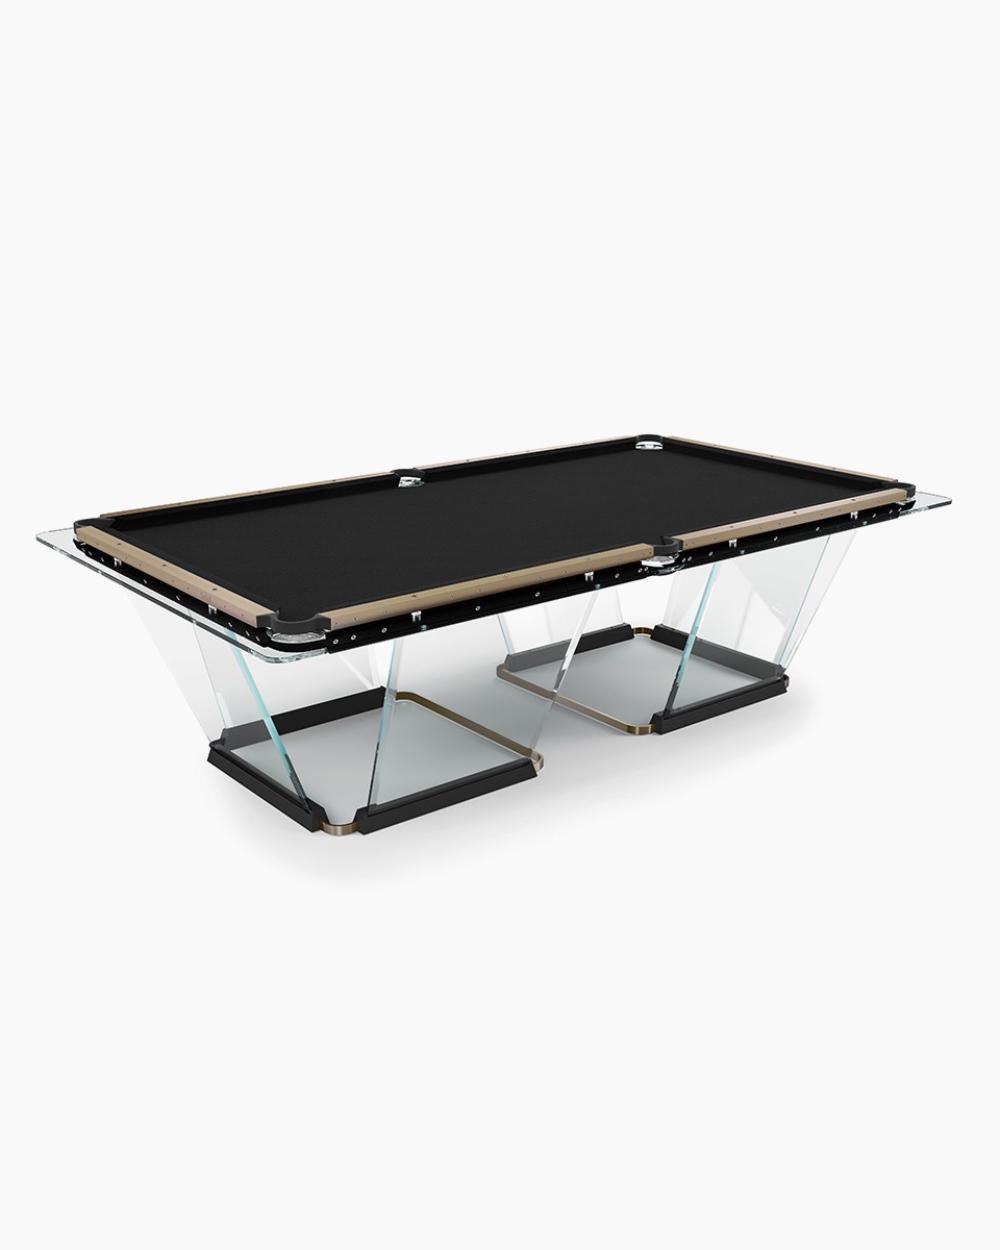 The Teckell T1.1 pool table with light bronze trim lures in both design aficionados and top players. The light dances across its handcrafted glass surfaces and glimmers when it strikes the light bronze aluminum rails. The tempered glass playing